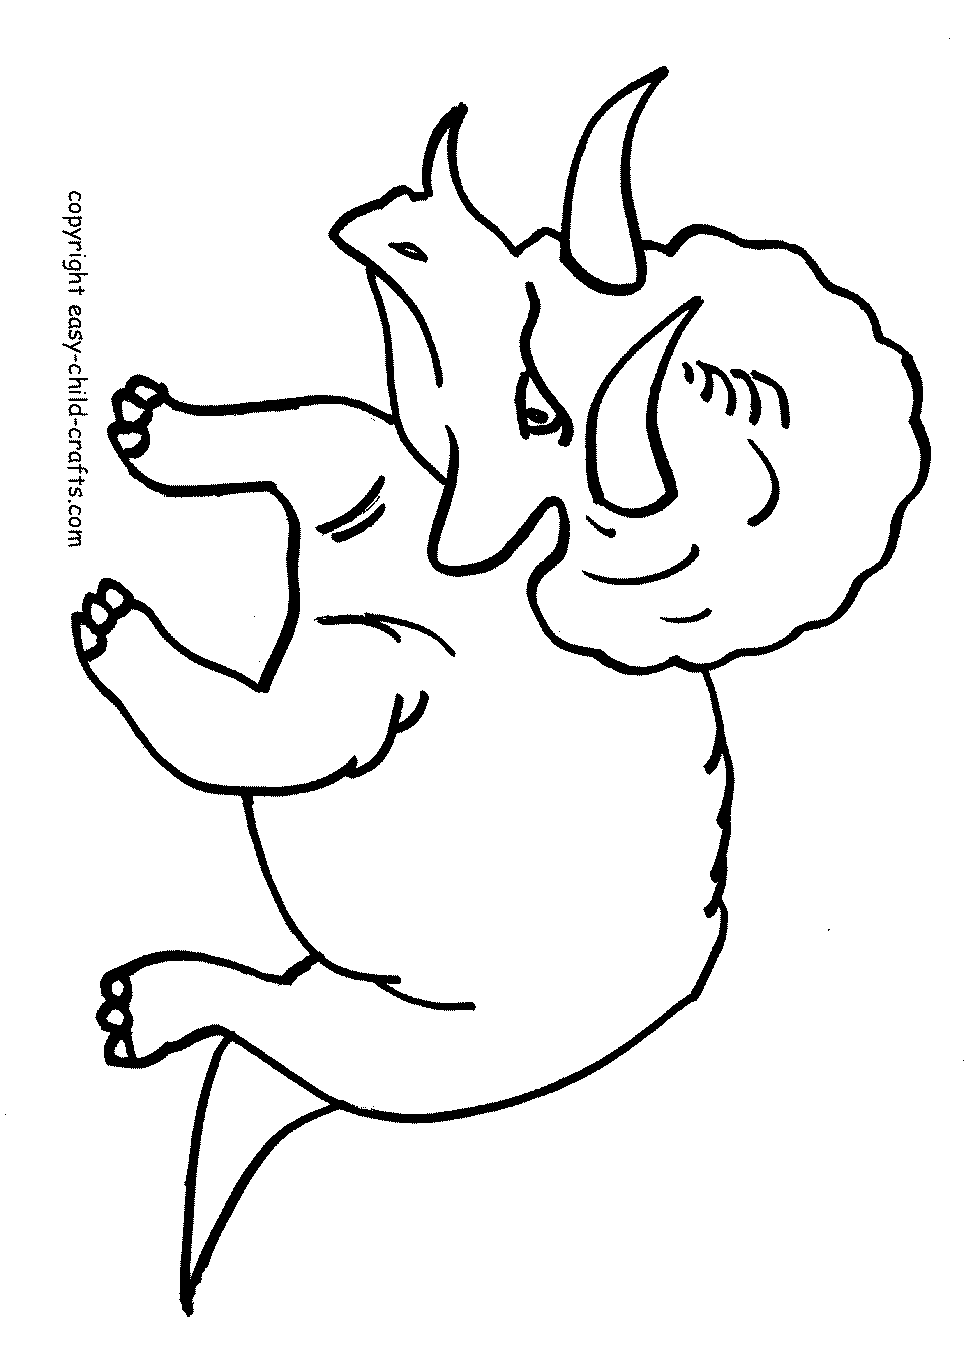 dinosaur pictures to color printable dinosaur coloring pages for kids cool2bkids dinosaur color pictures to 